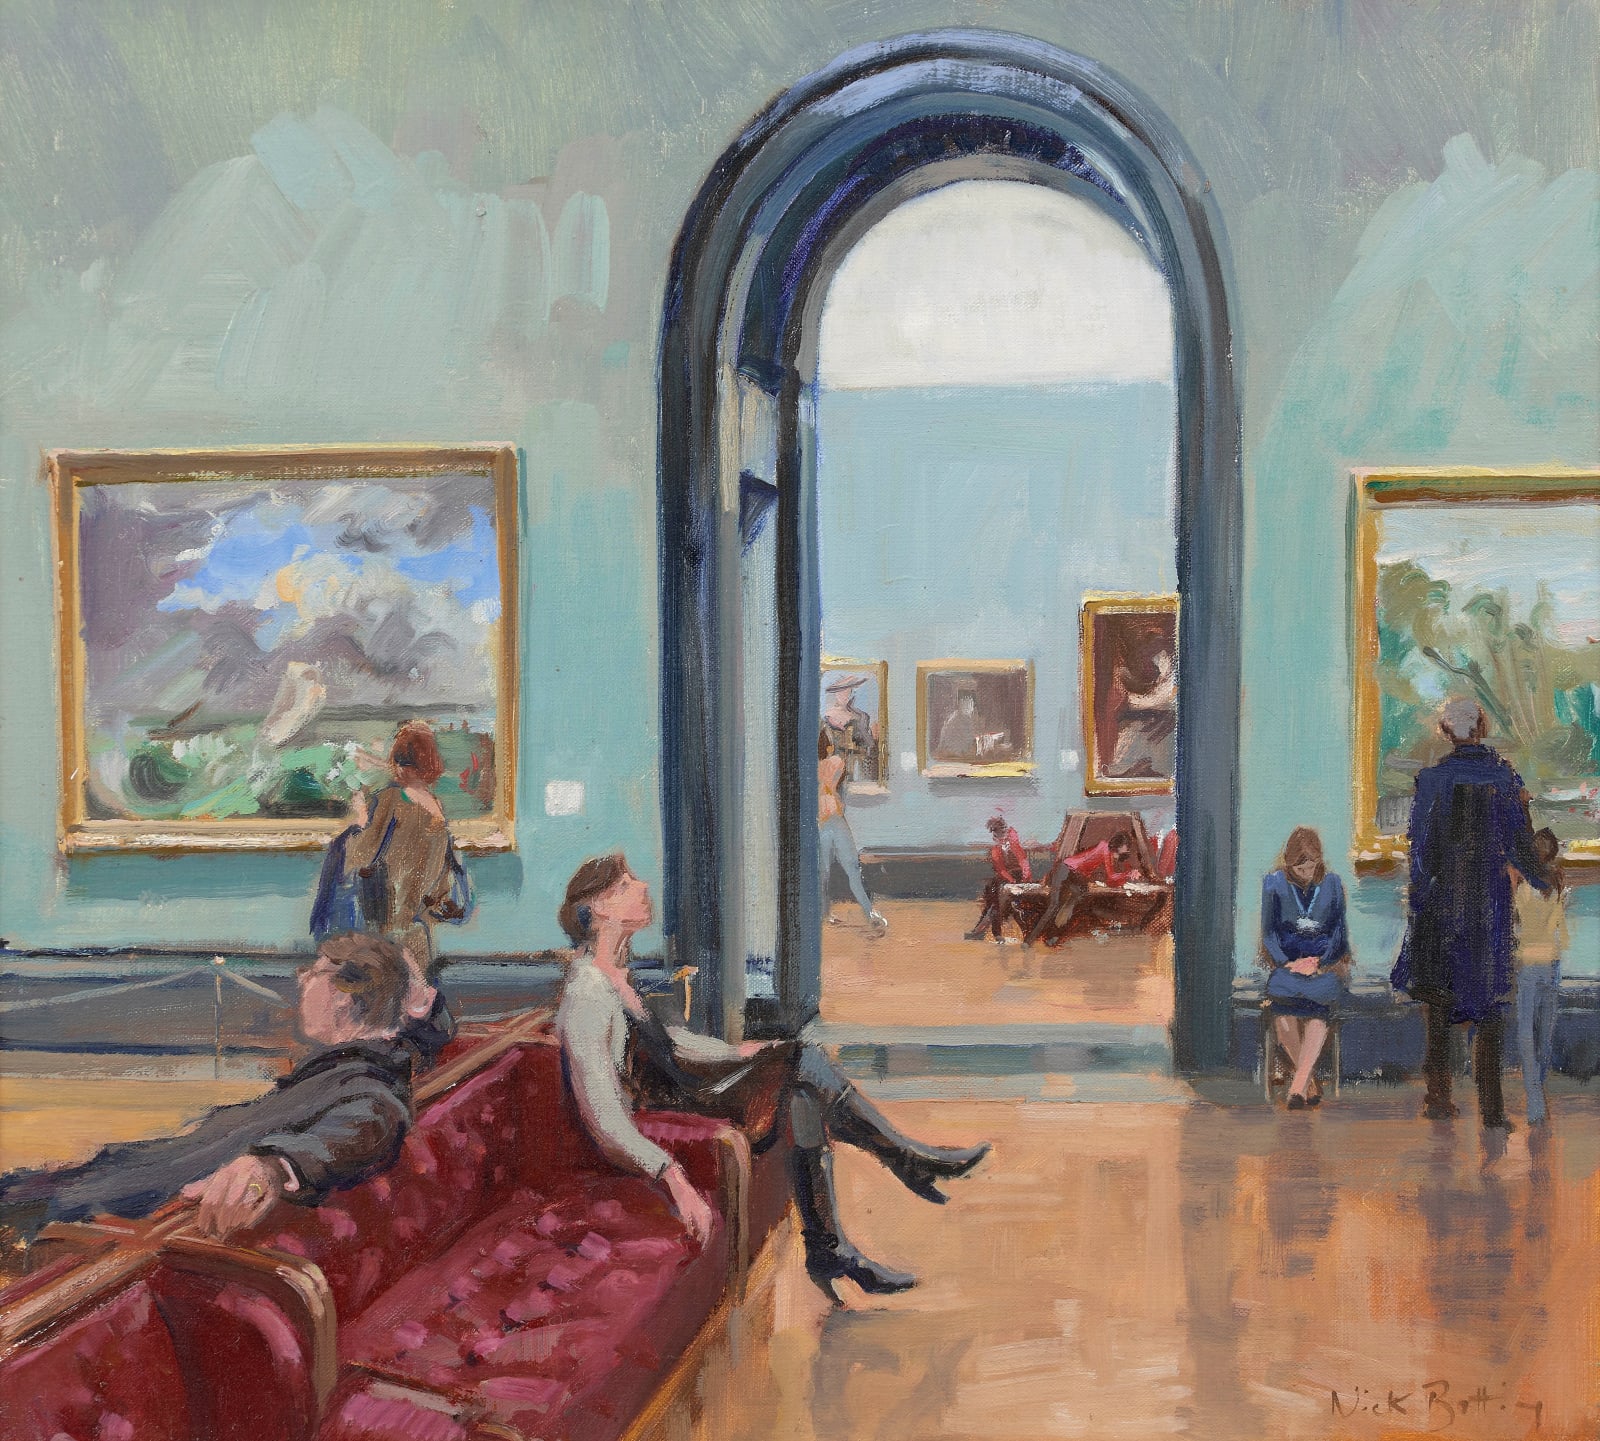 Nick Botting, The National Gallery, Late Morning